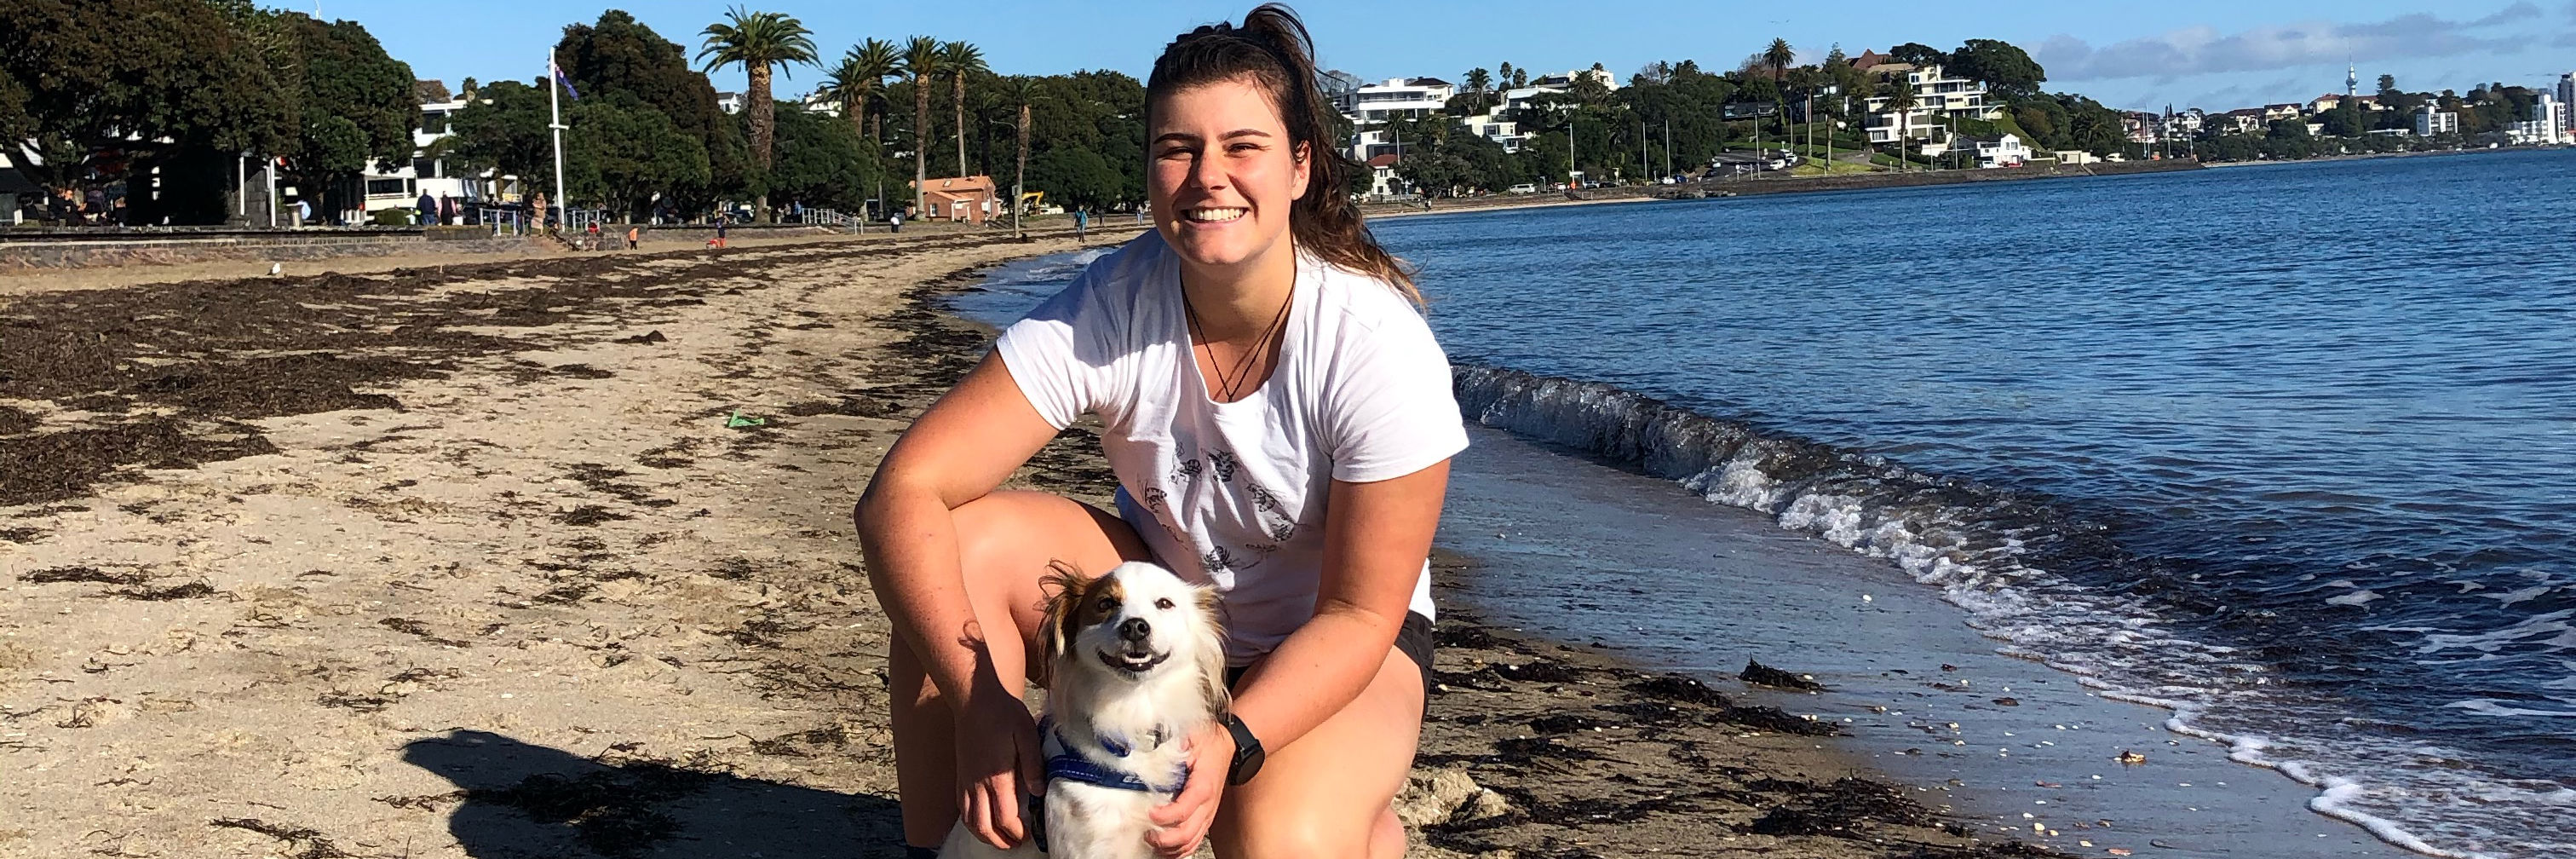 Rachael with her dog at the beach